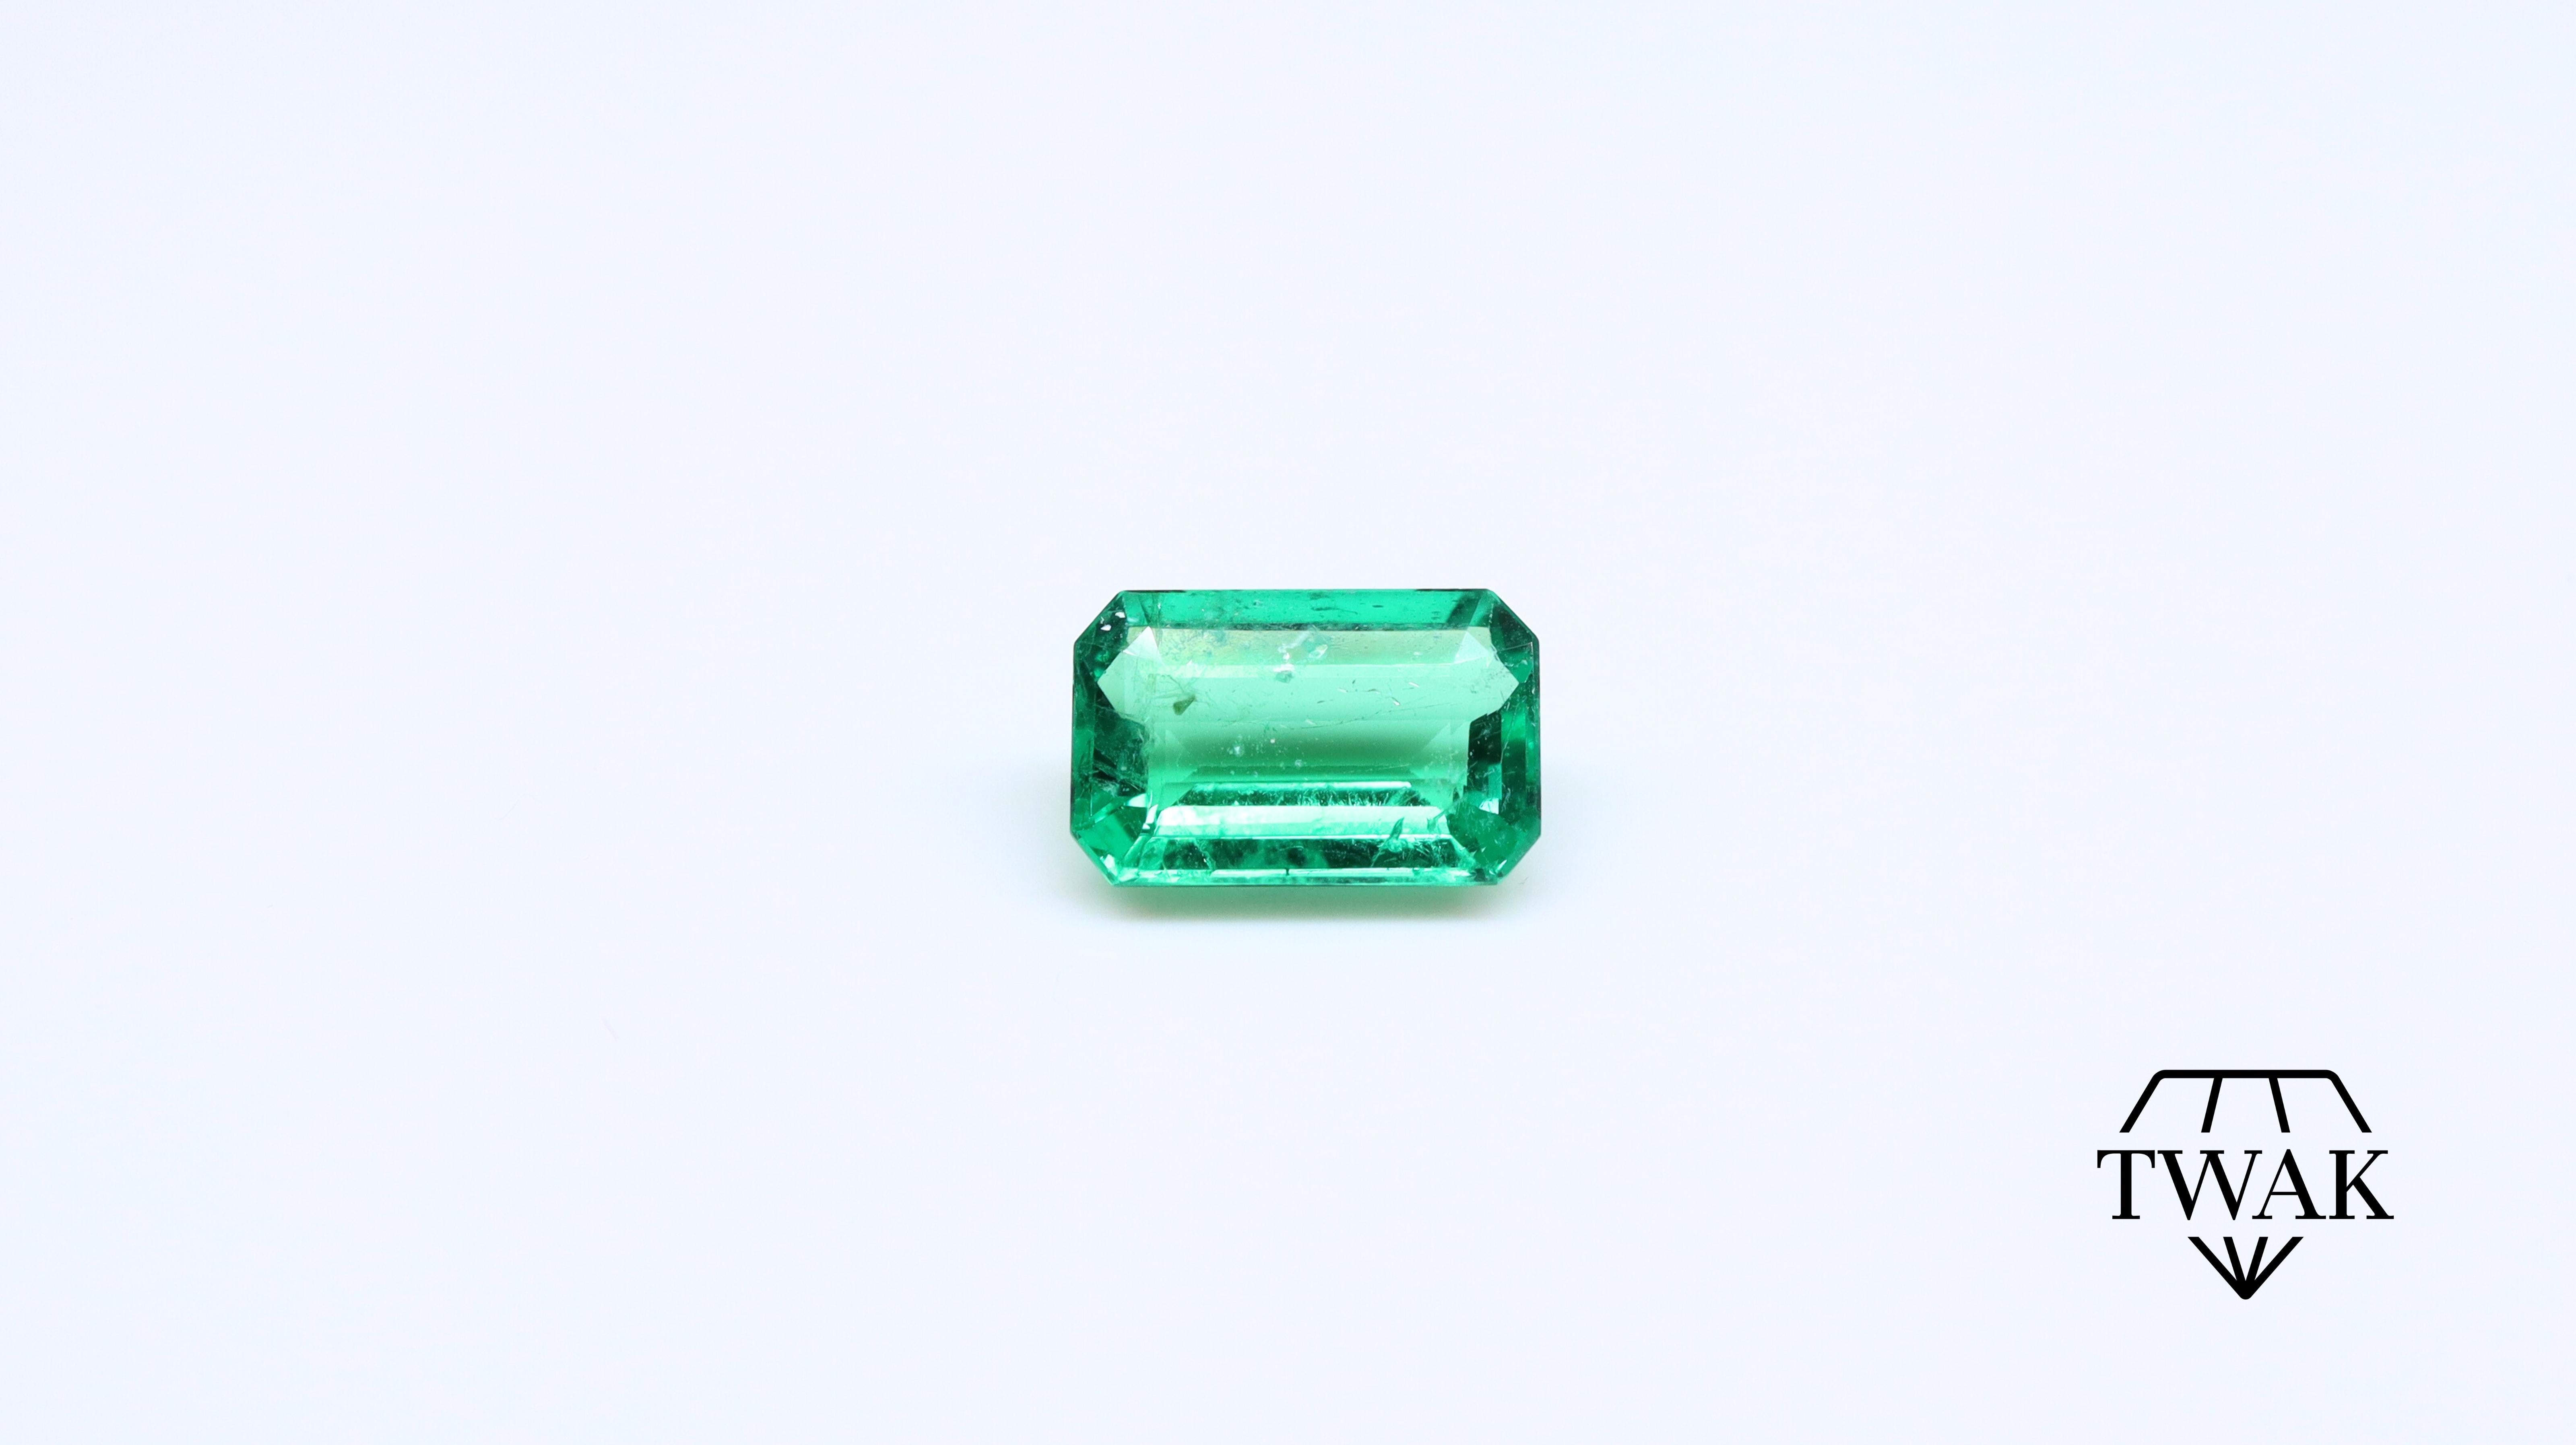 A beautiful Emerald with excellent color, crystal, and saturation.

Details and description:
Dimensions: 8.93 x 5.87 x 3.45mm
Weight: 1.44ct
Color: Intense Green 
Treatment: Opticom

Emeralds are naturally porous and inclusive stones, with surface